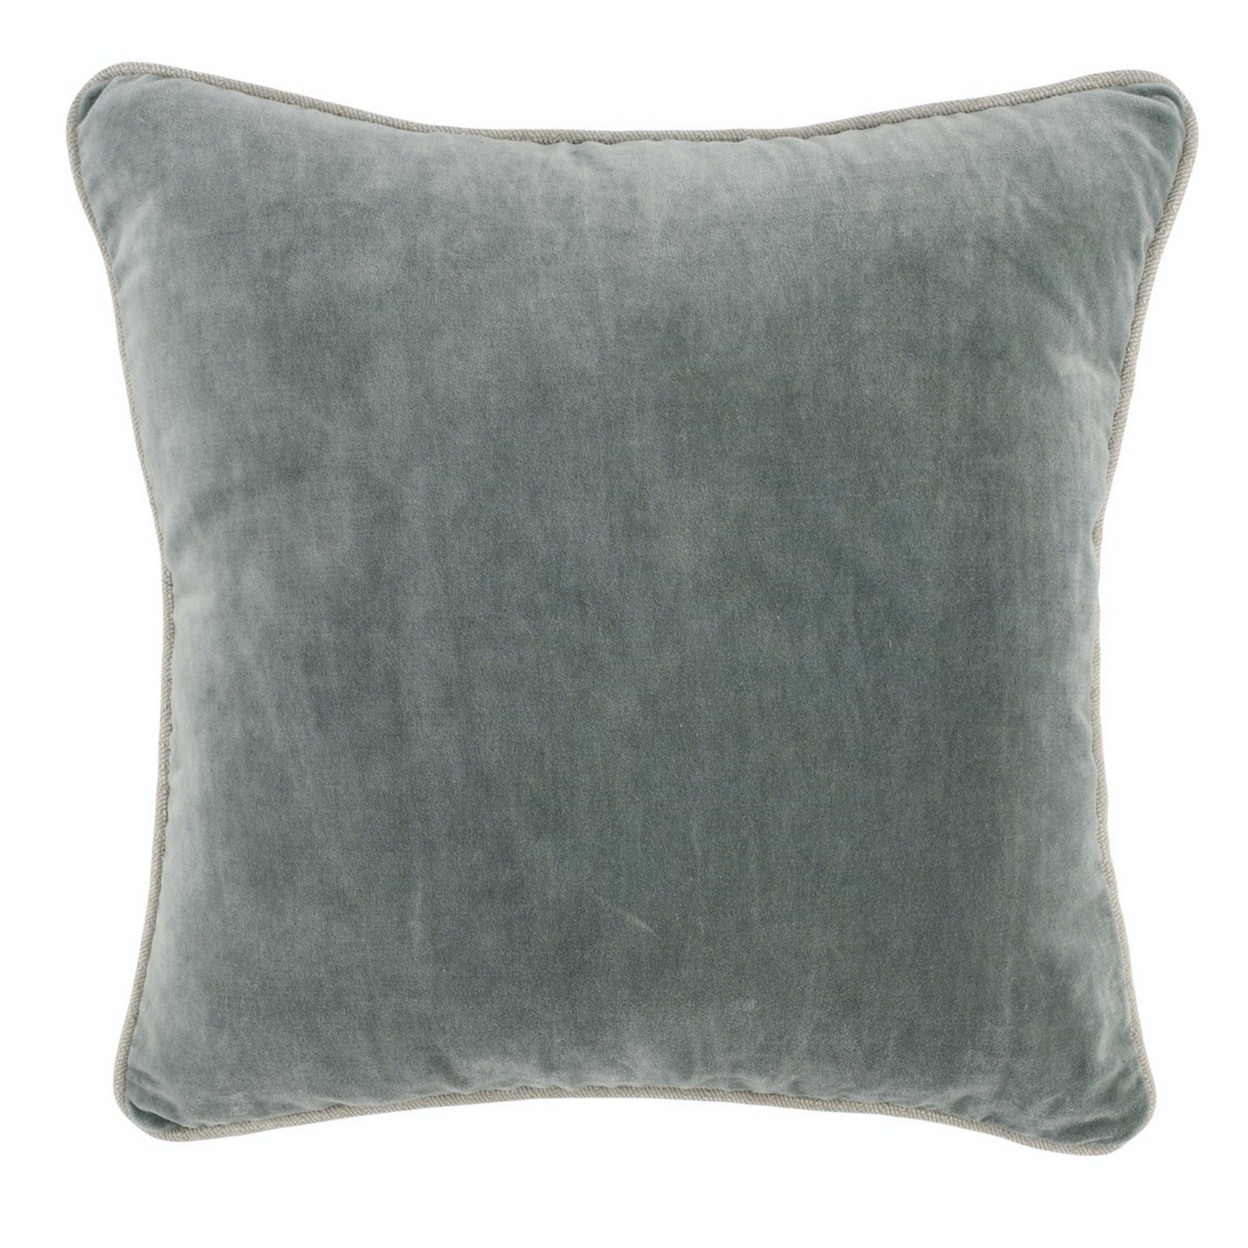 Square Throw Pillow With Cotton Cover, Sage Green- Saltoro Sherpi